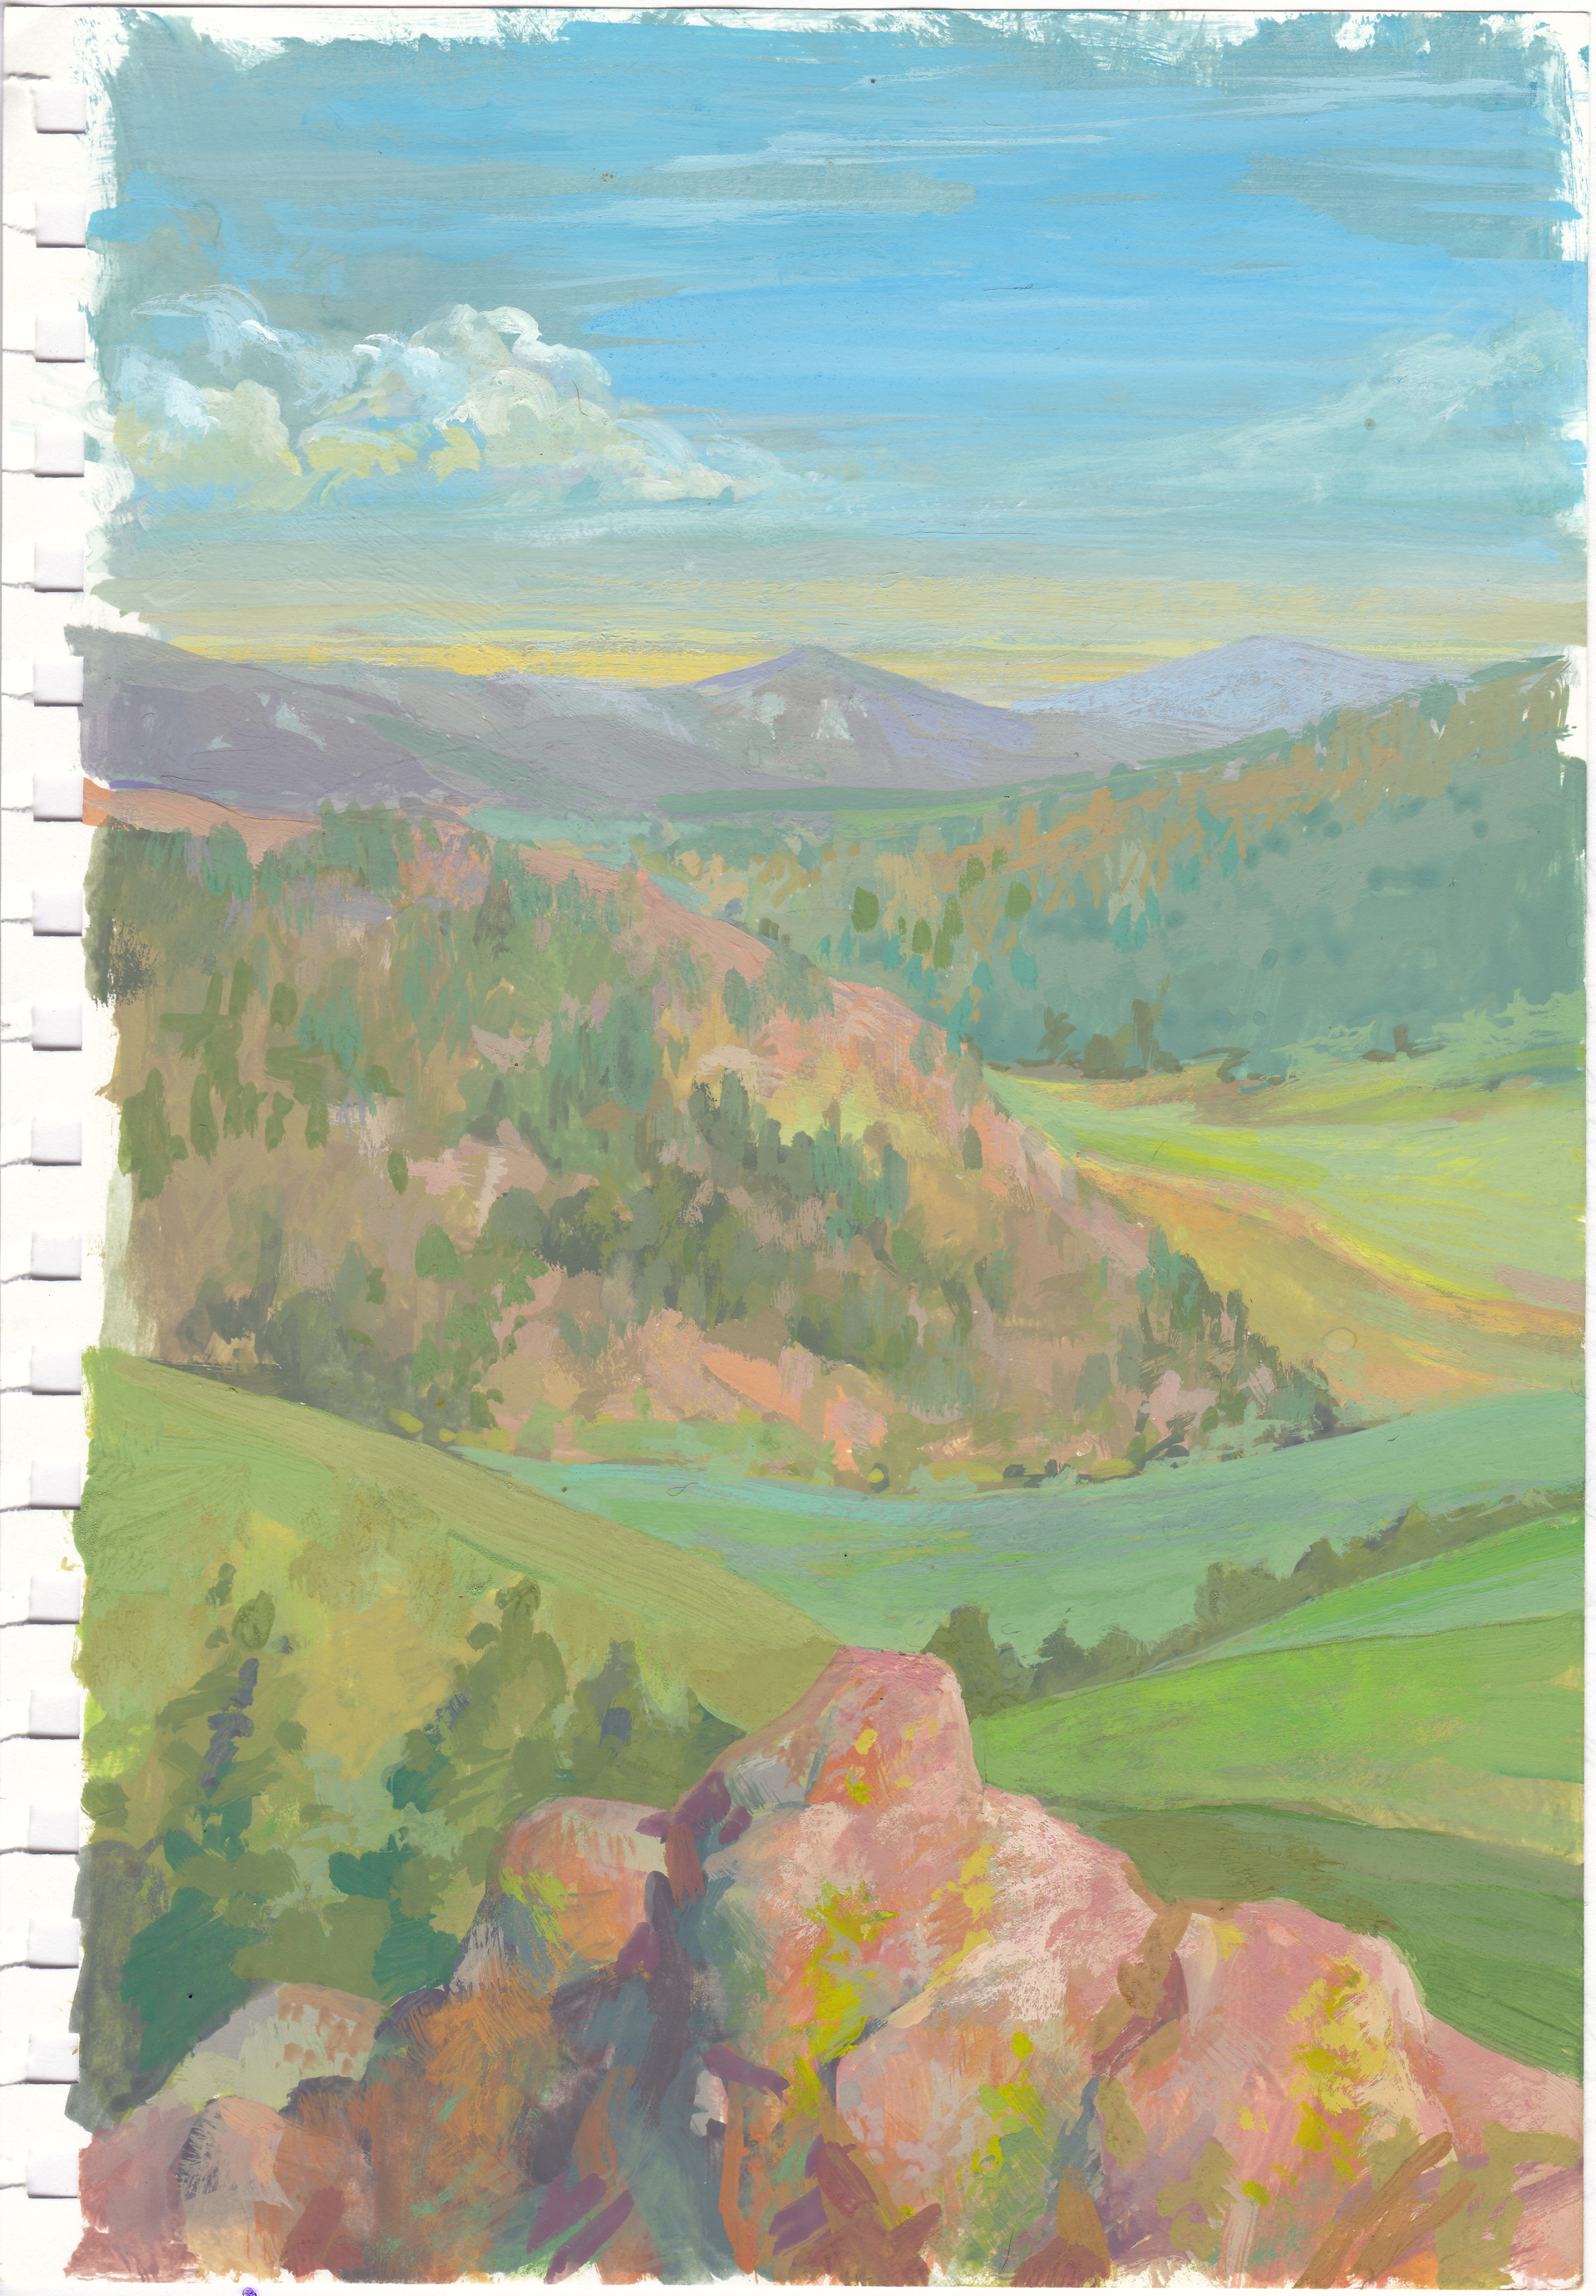 Study: Pink Boulder And The Valley by Charis Carmichael Braun